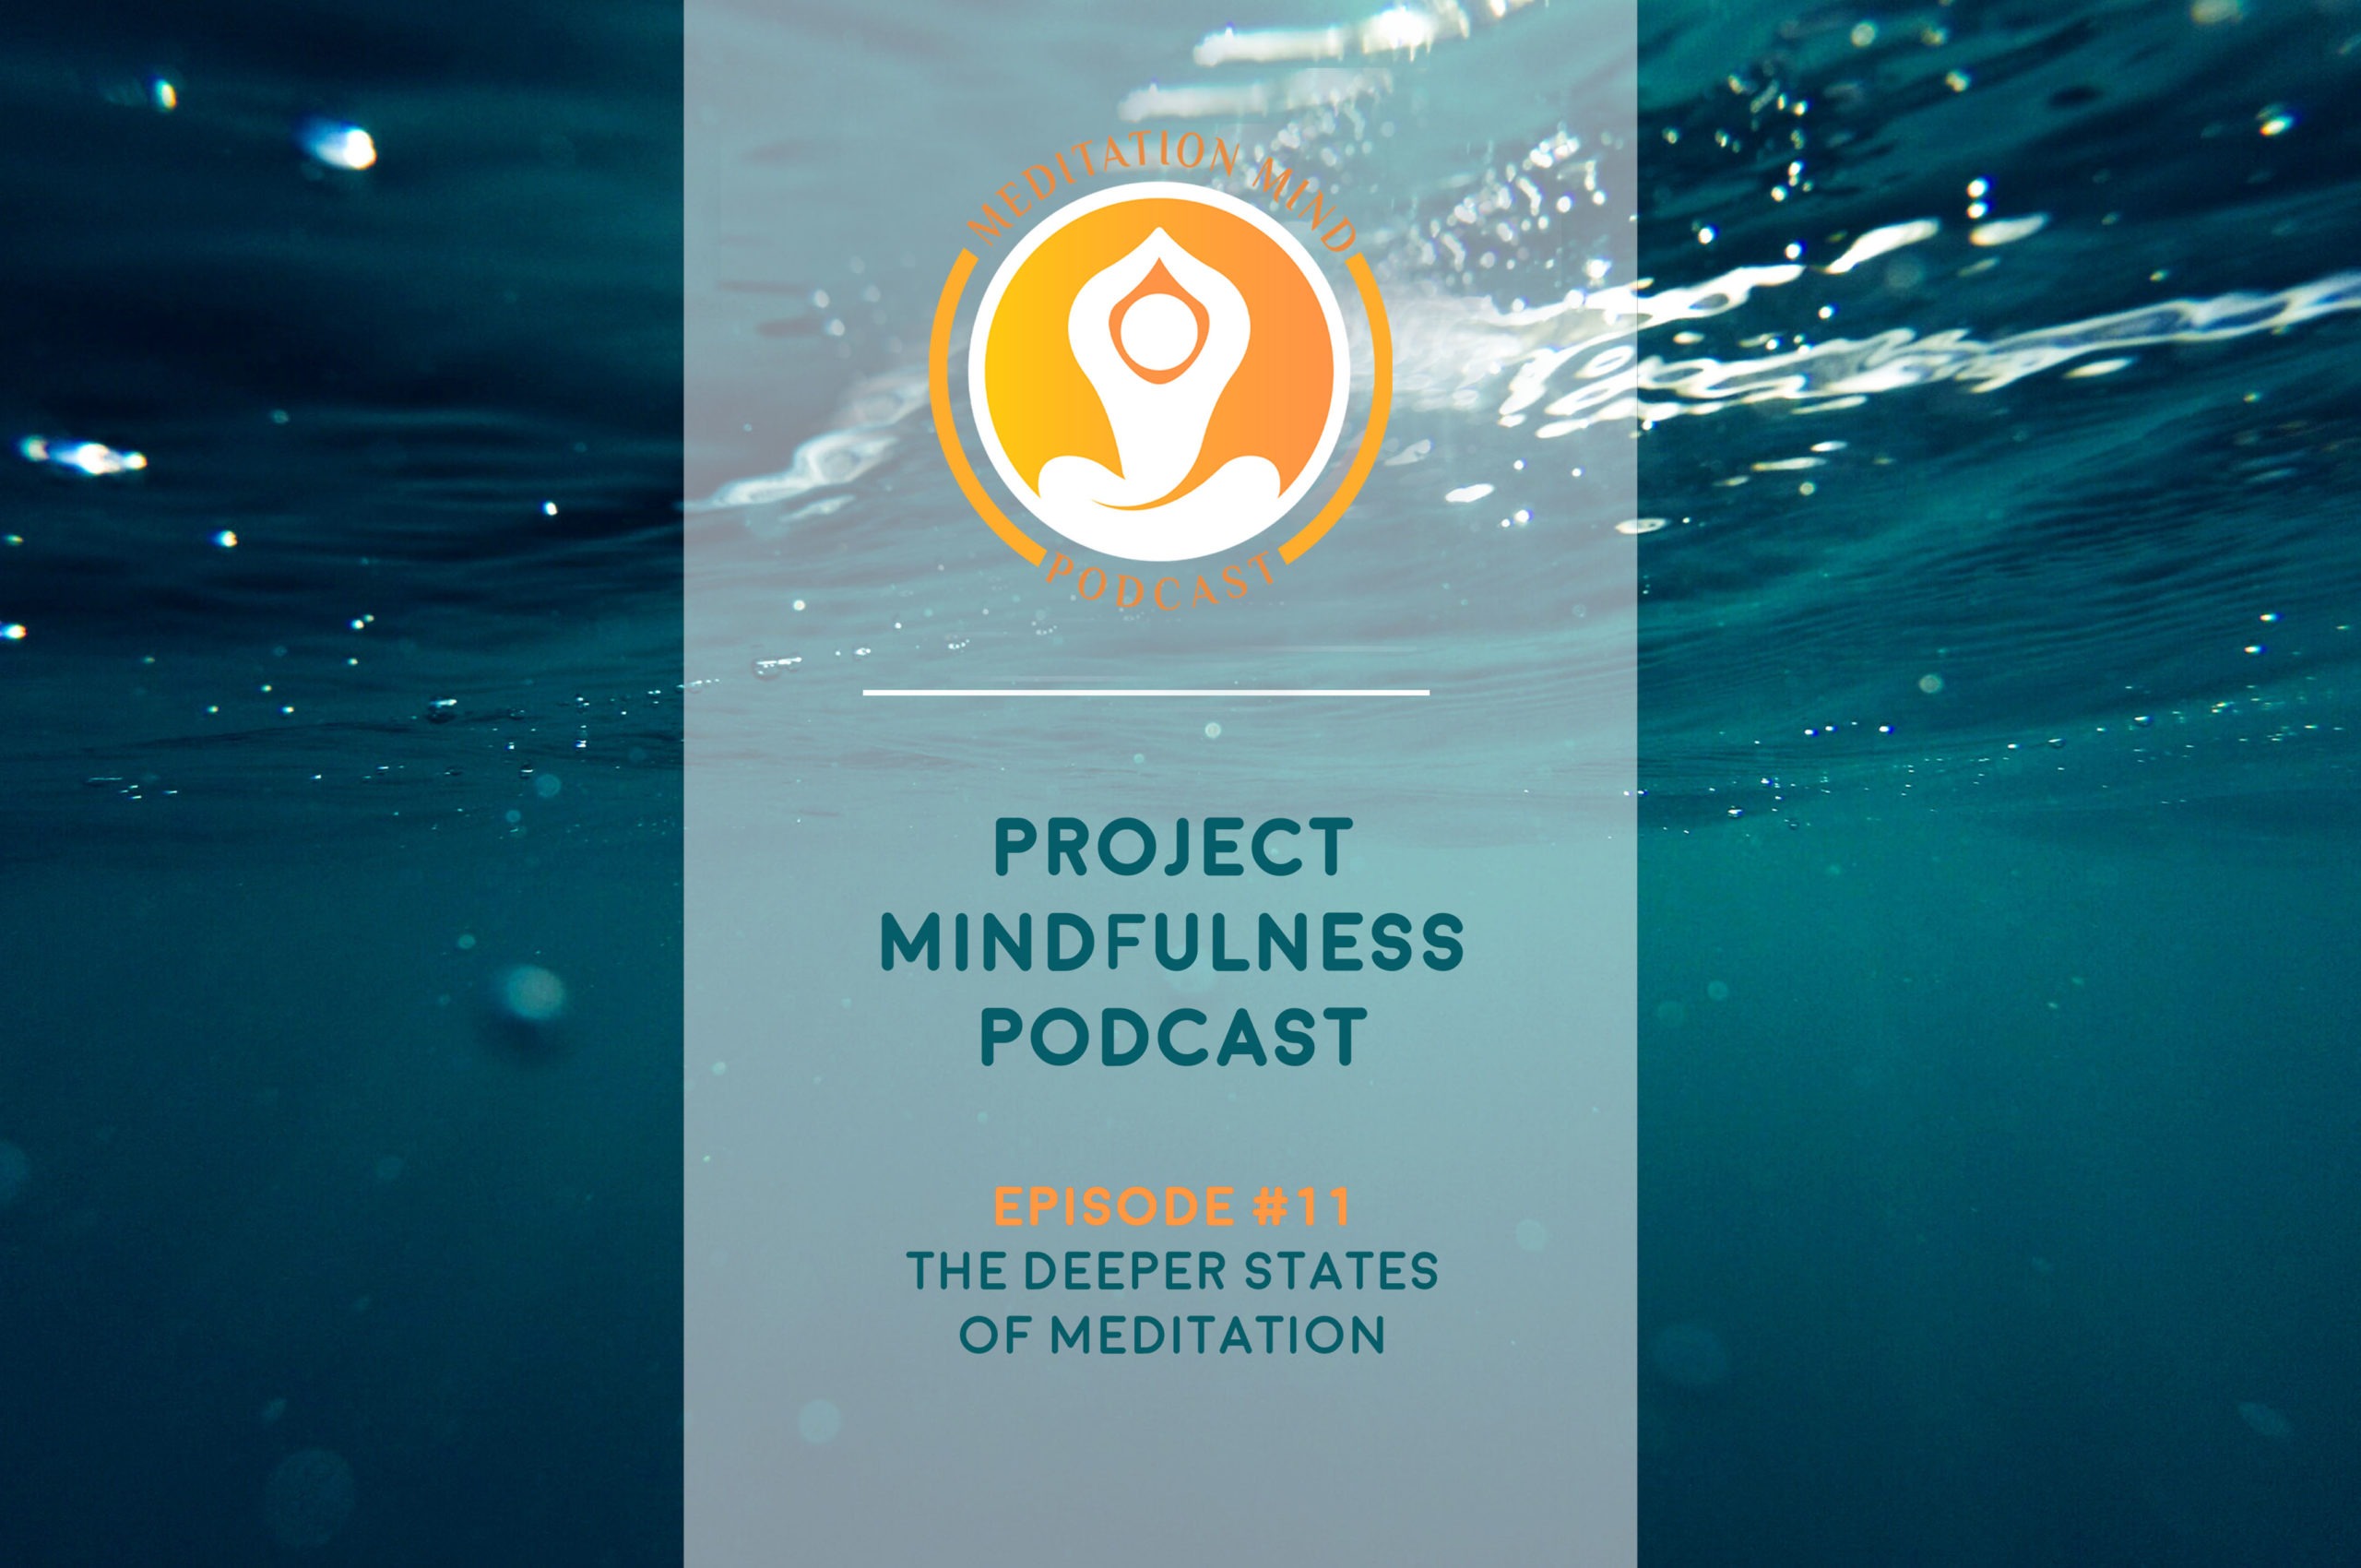 Silas Day talks about the deeper states of meditation and his practice in Buddhism